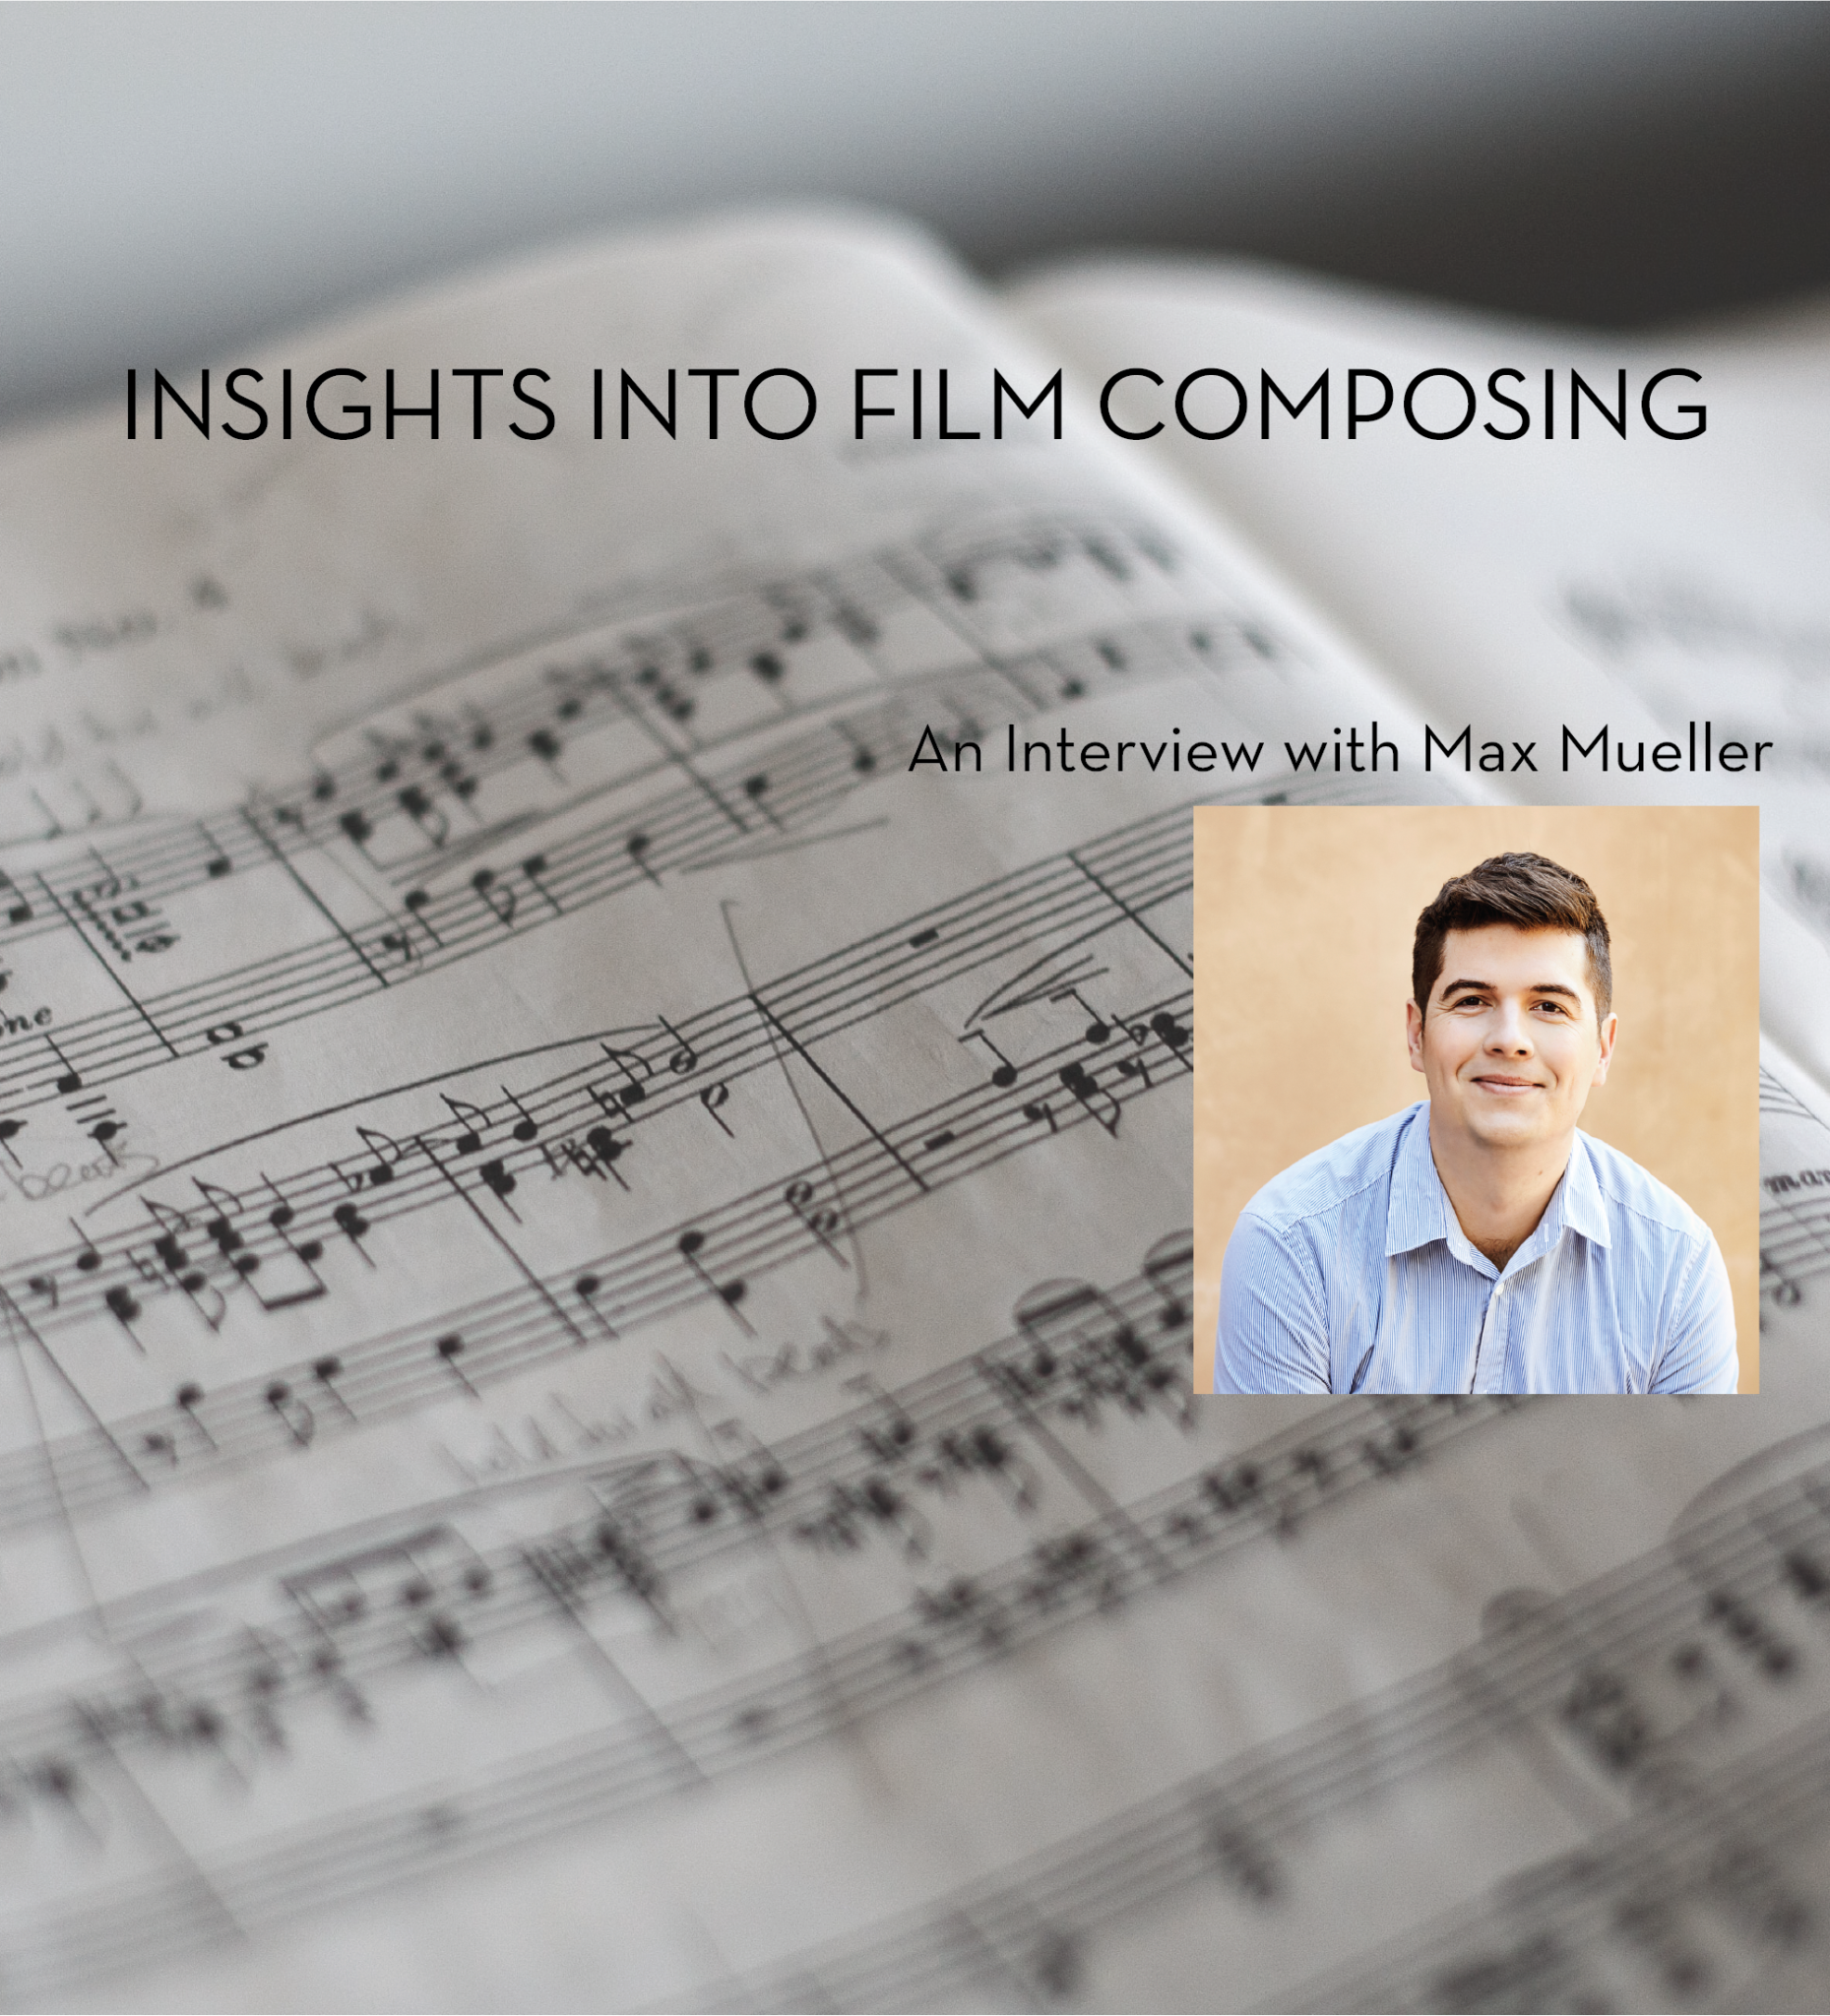 Insights into Film Composing